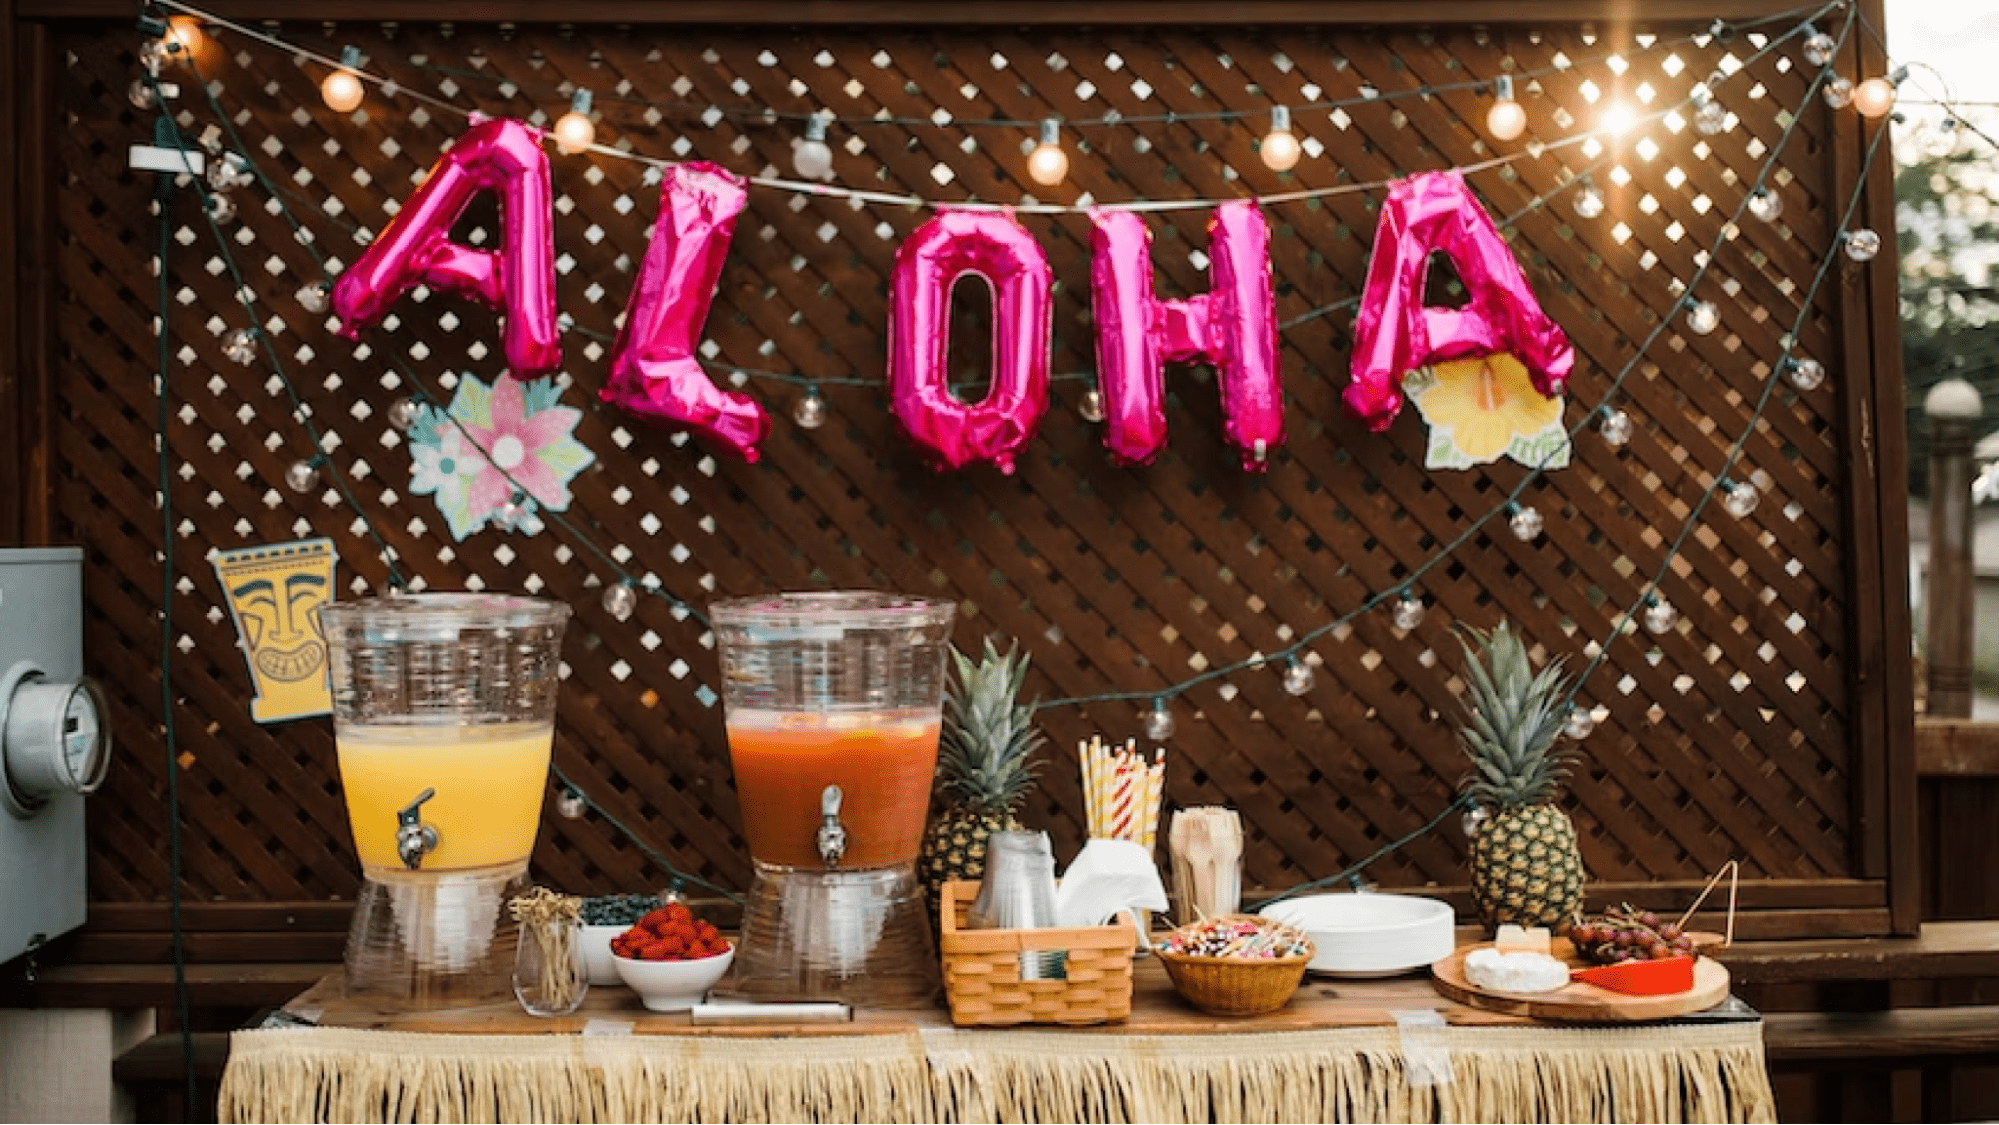 Table with drinks decorated for luau